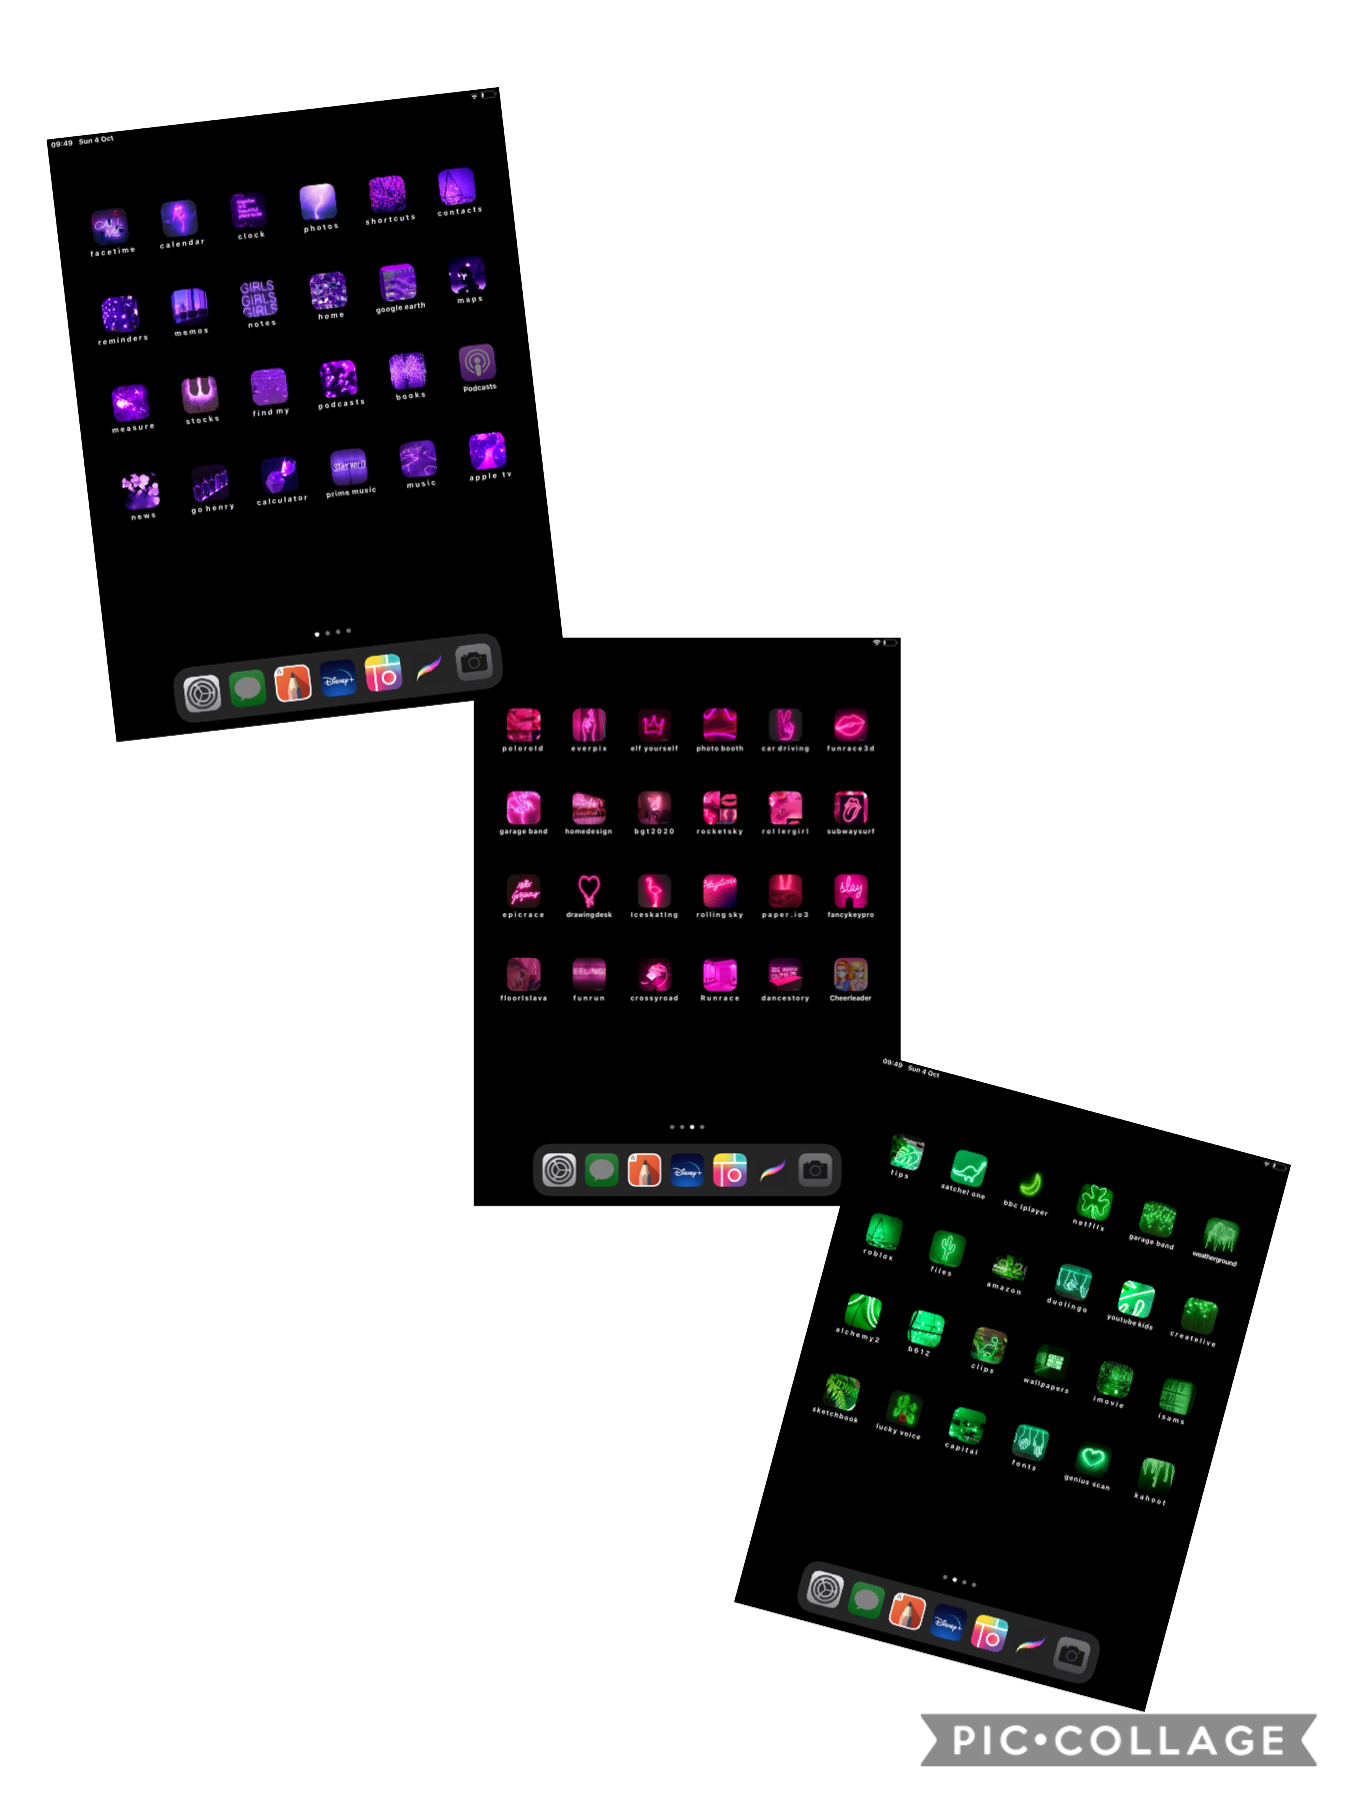 Made my iPad aesthetic with shortcuts